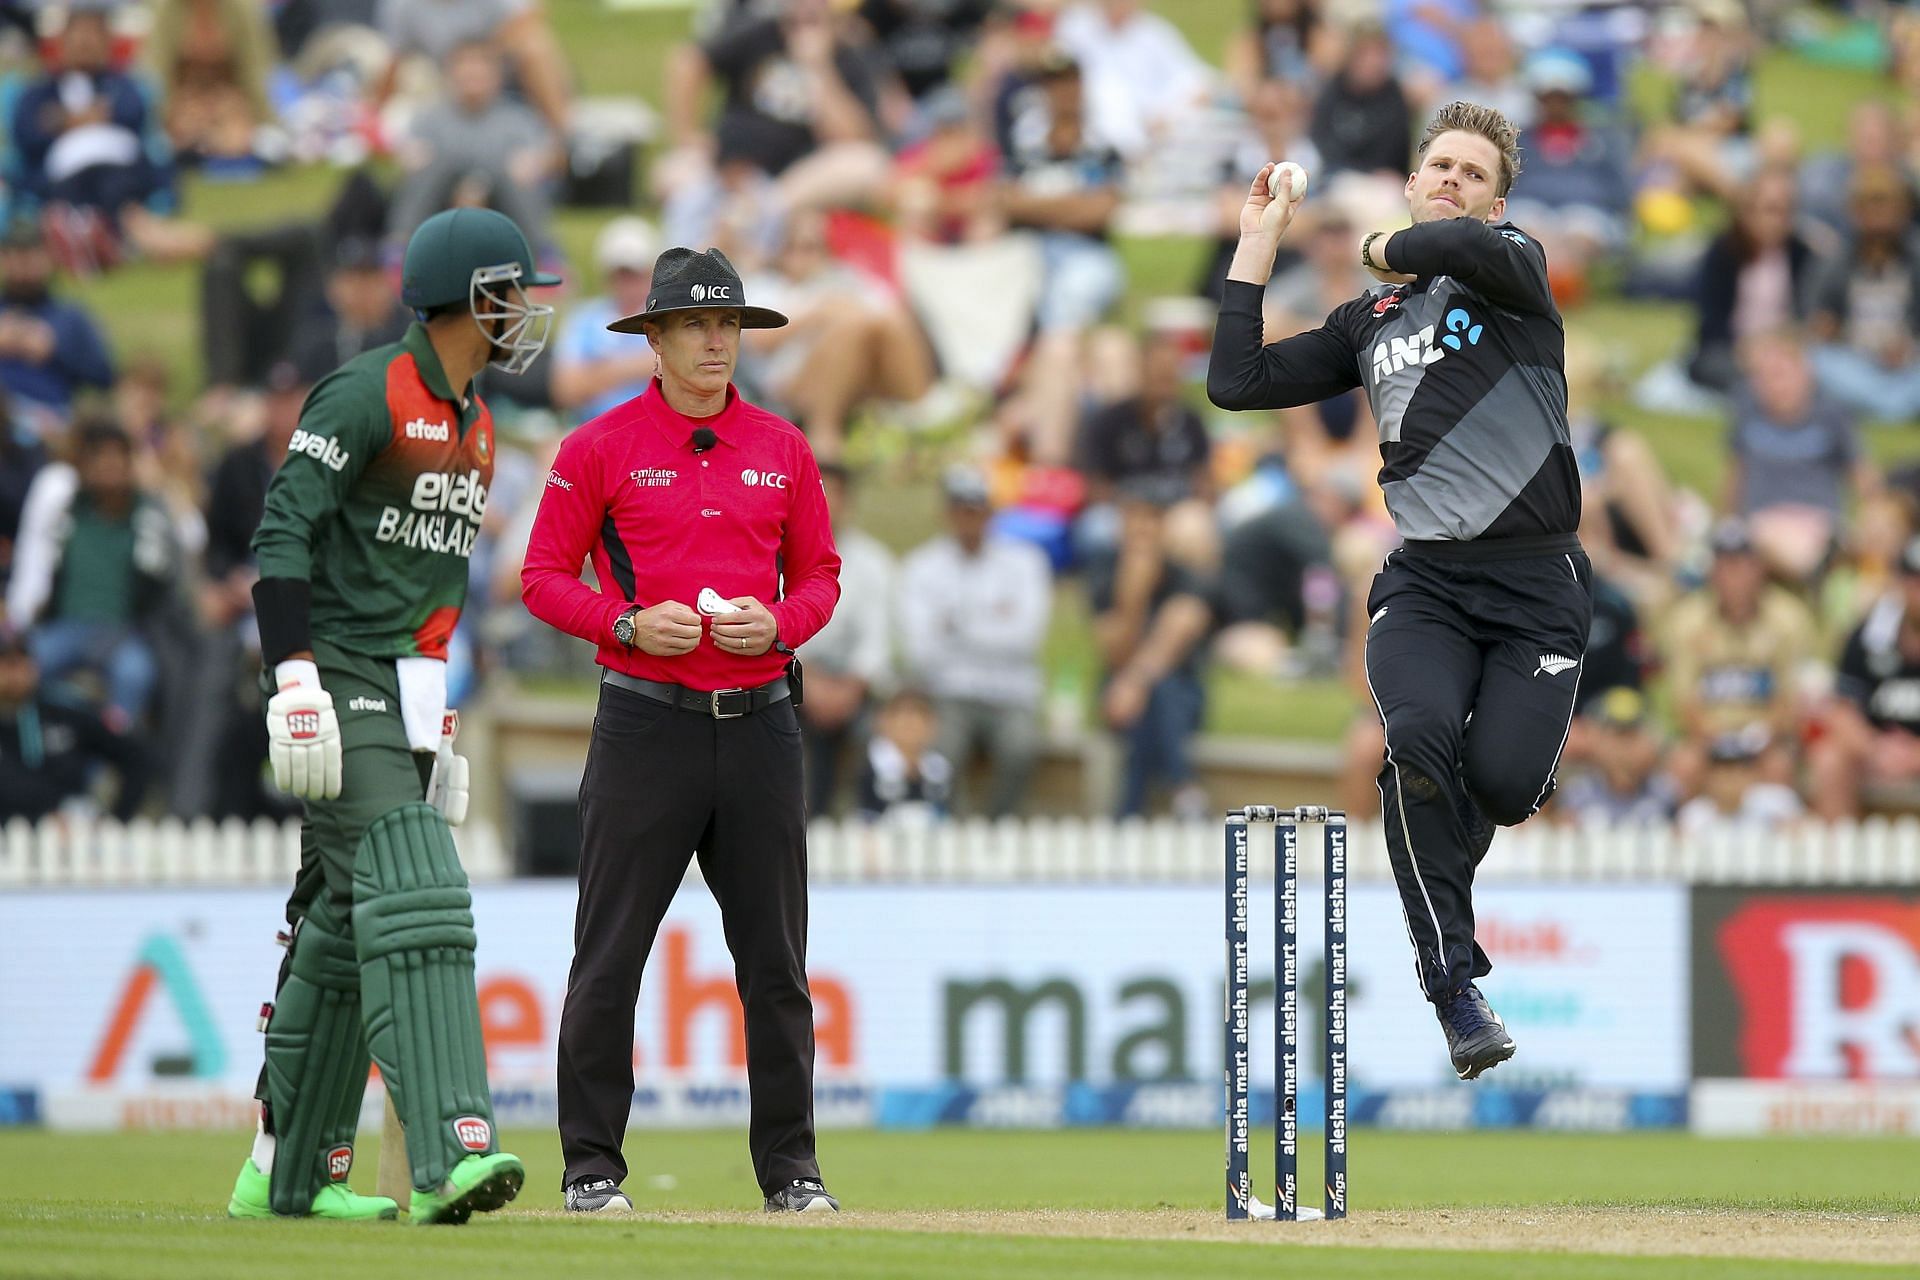 When Lockie Ferguson steams in, fewer sights in the sport are as threatening, yet equally exhilarating.